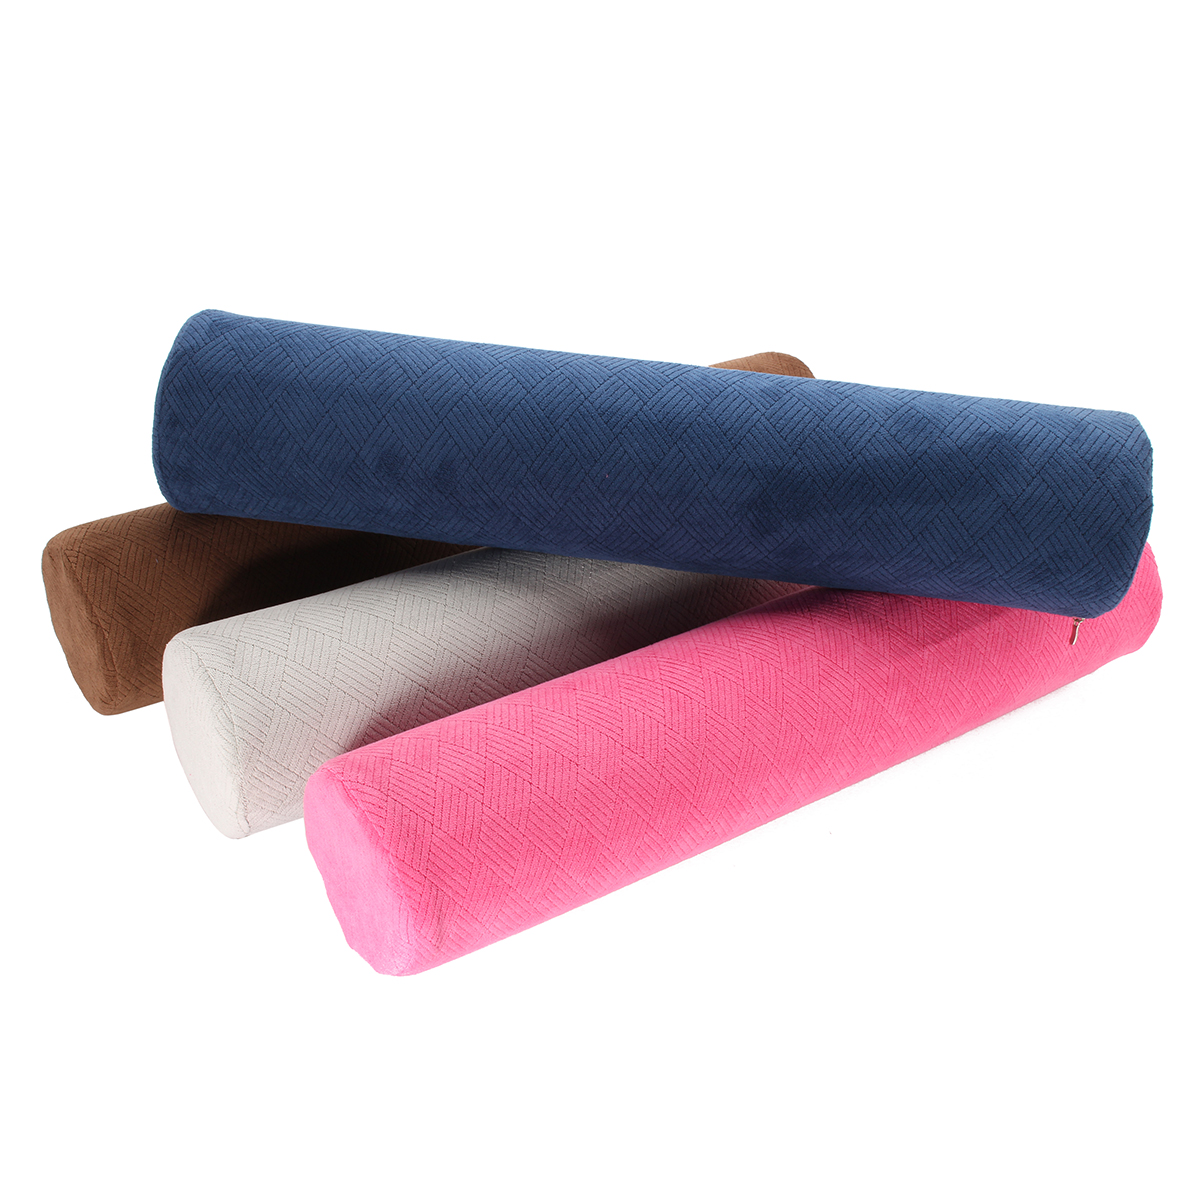 6012cm-Round-Cervical-Support-Sleeping-Positioning-Roll-Memory-Foam-Neck-Pillows-1234905